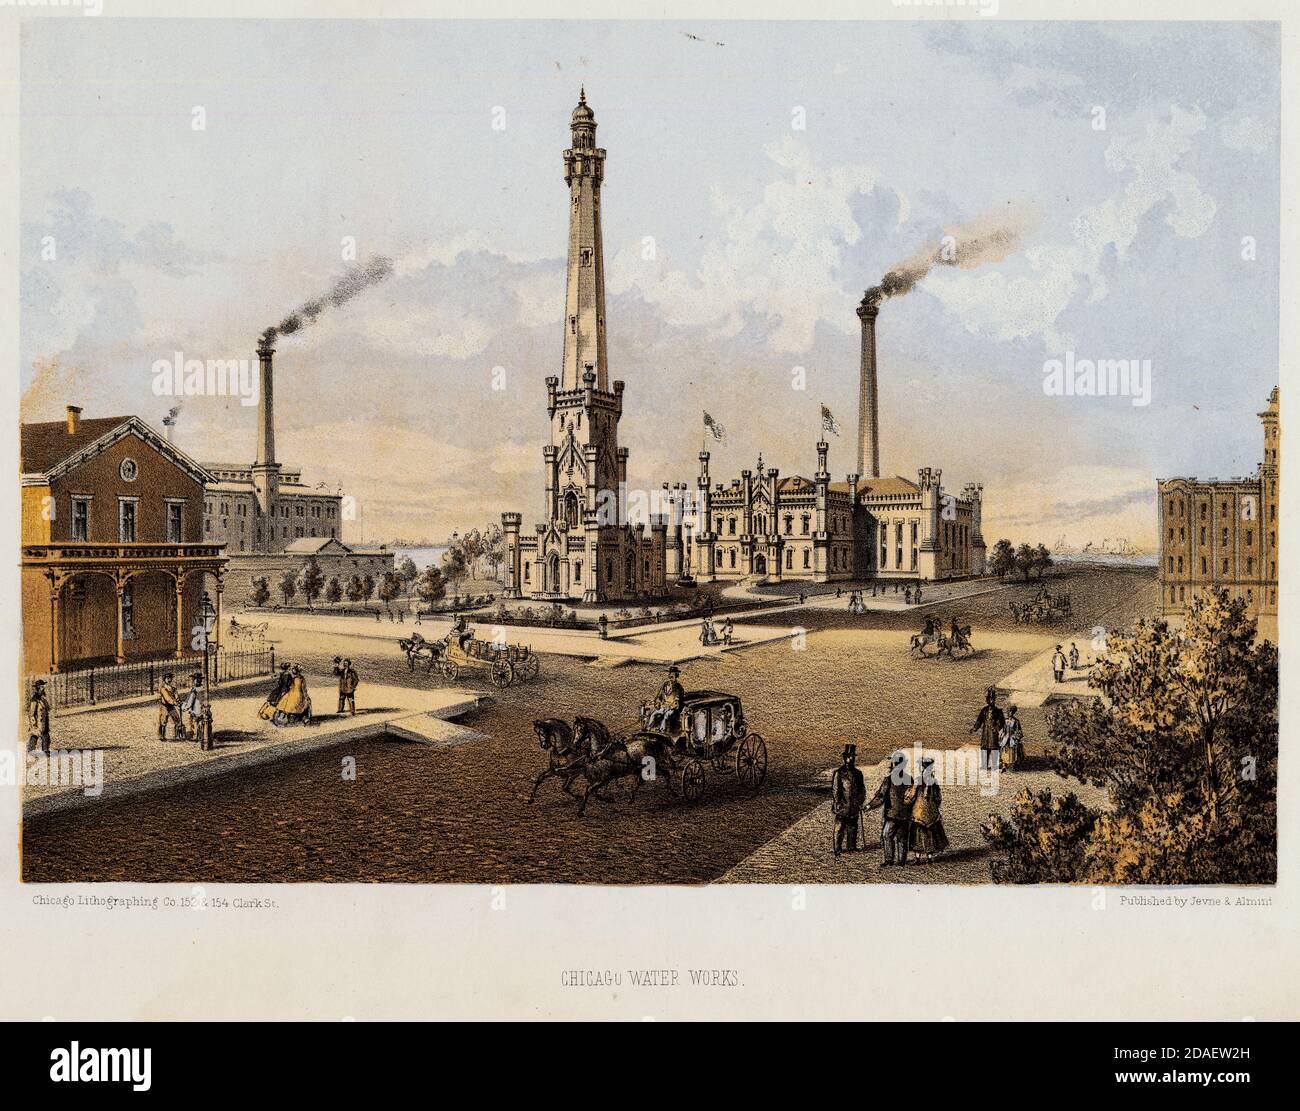 Jevne and Almini lithograph titled Chicago Water Works, 1867. Stock Photo